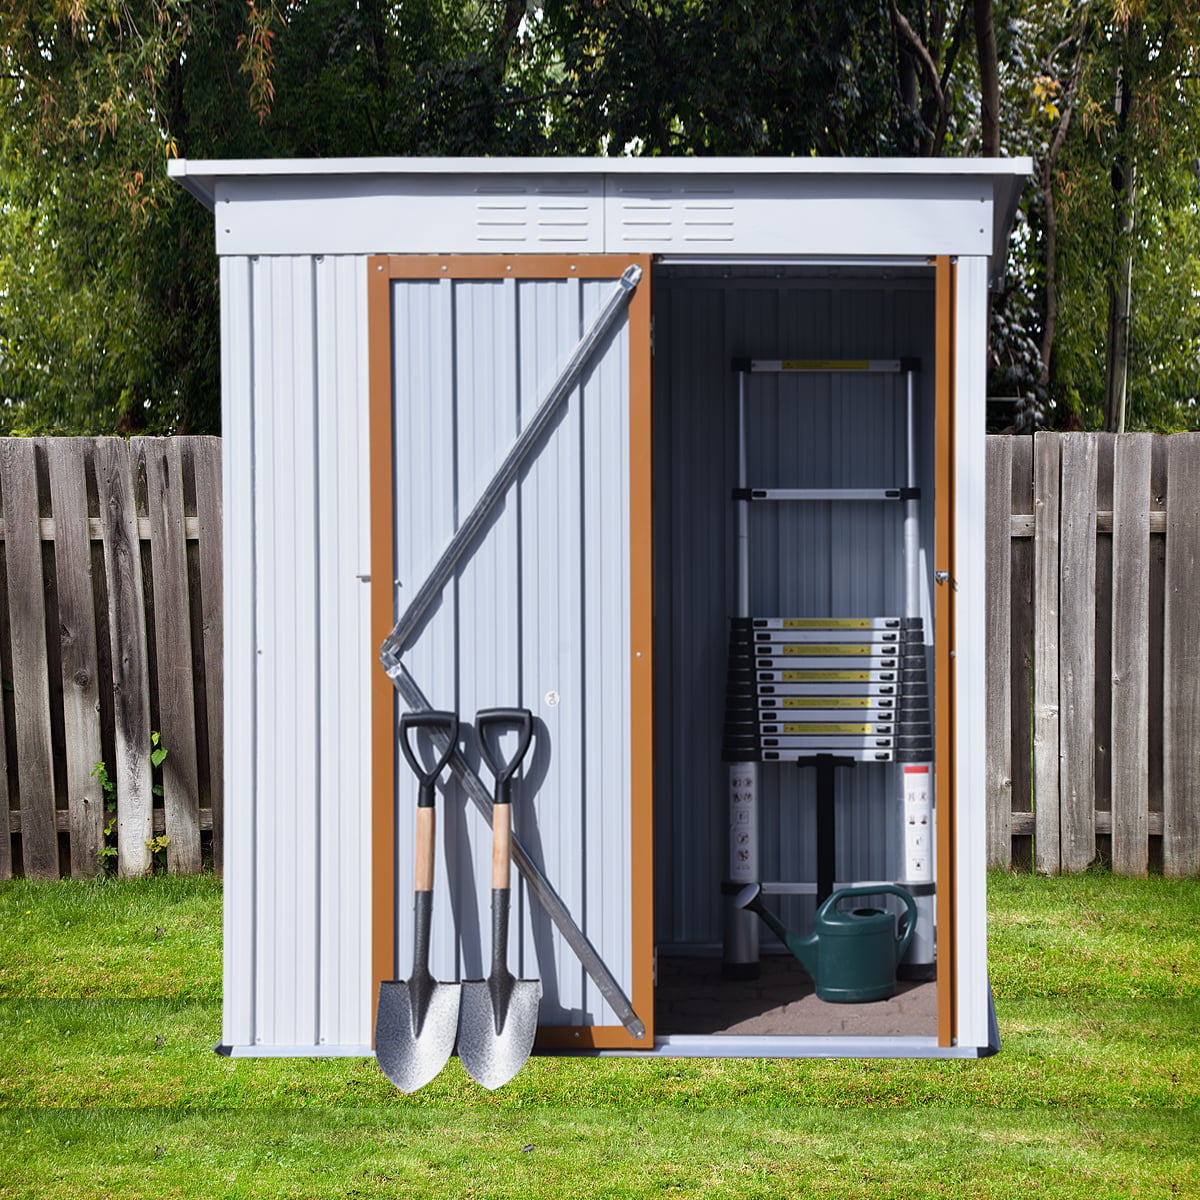 Grey Bealife 5' x 3' Outdoor Storage Shed Clearance Waterproof Tool Shed Metal Outdoor Storage Cabinet with Single Lockable Door Backyard Shed for Garden Patio and Lawn 